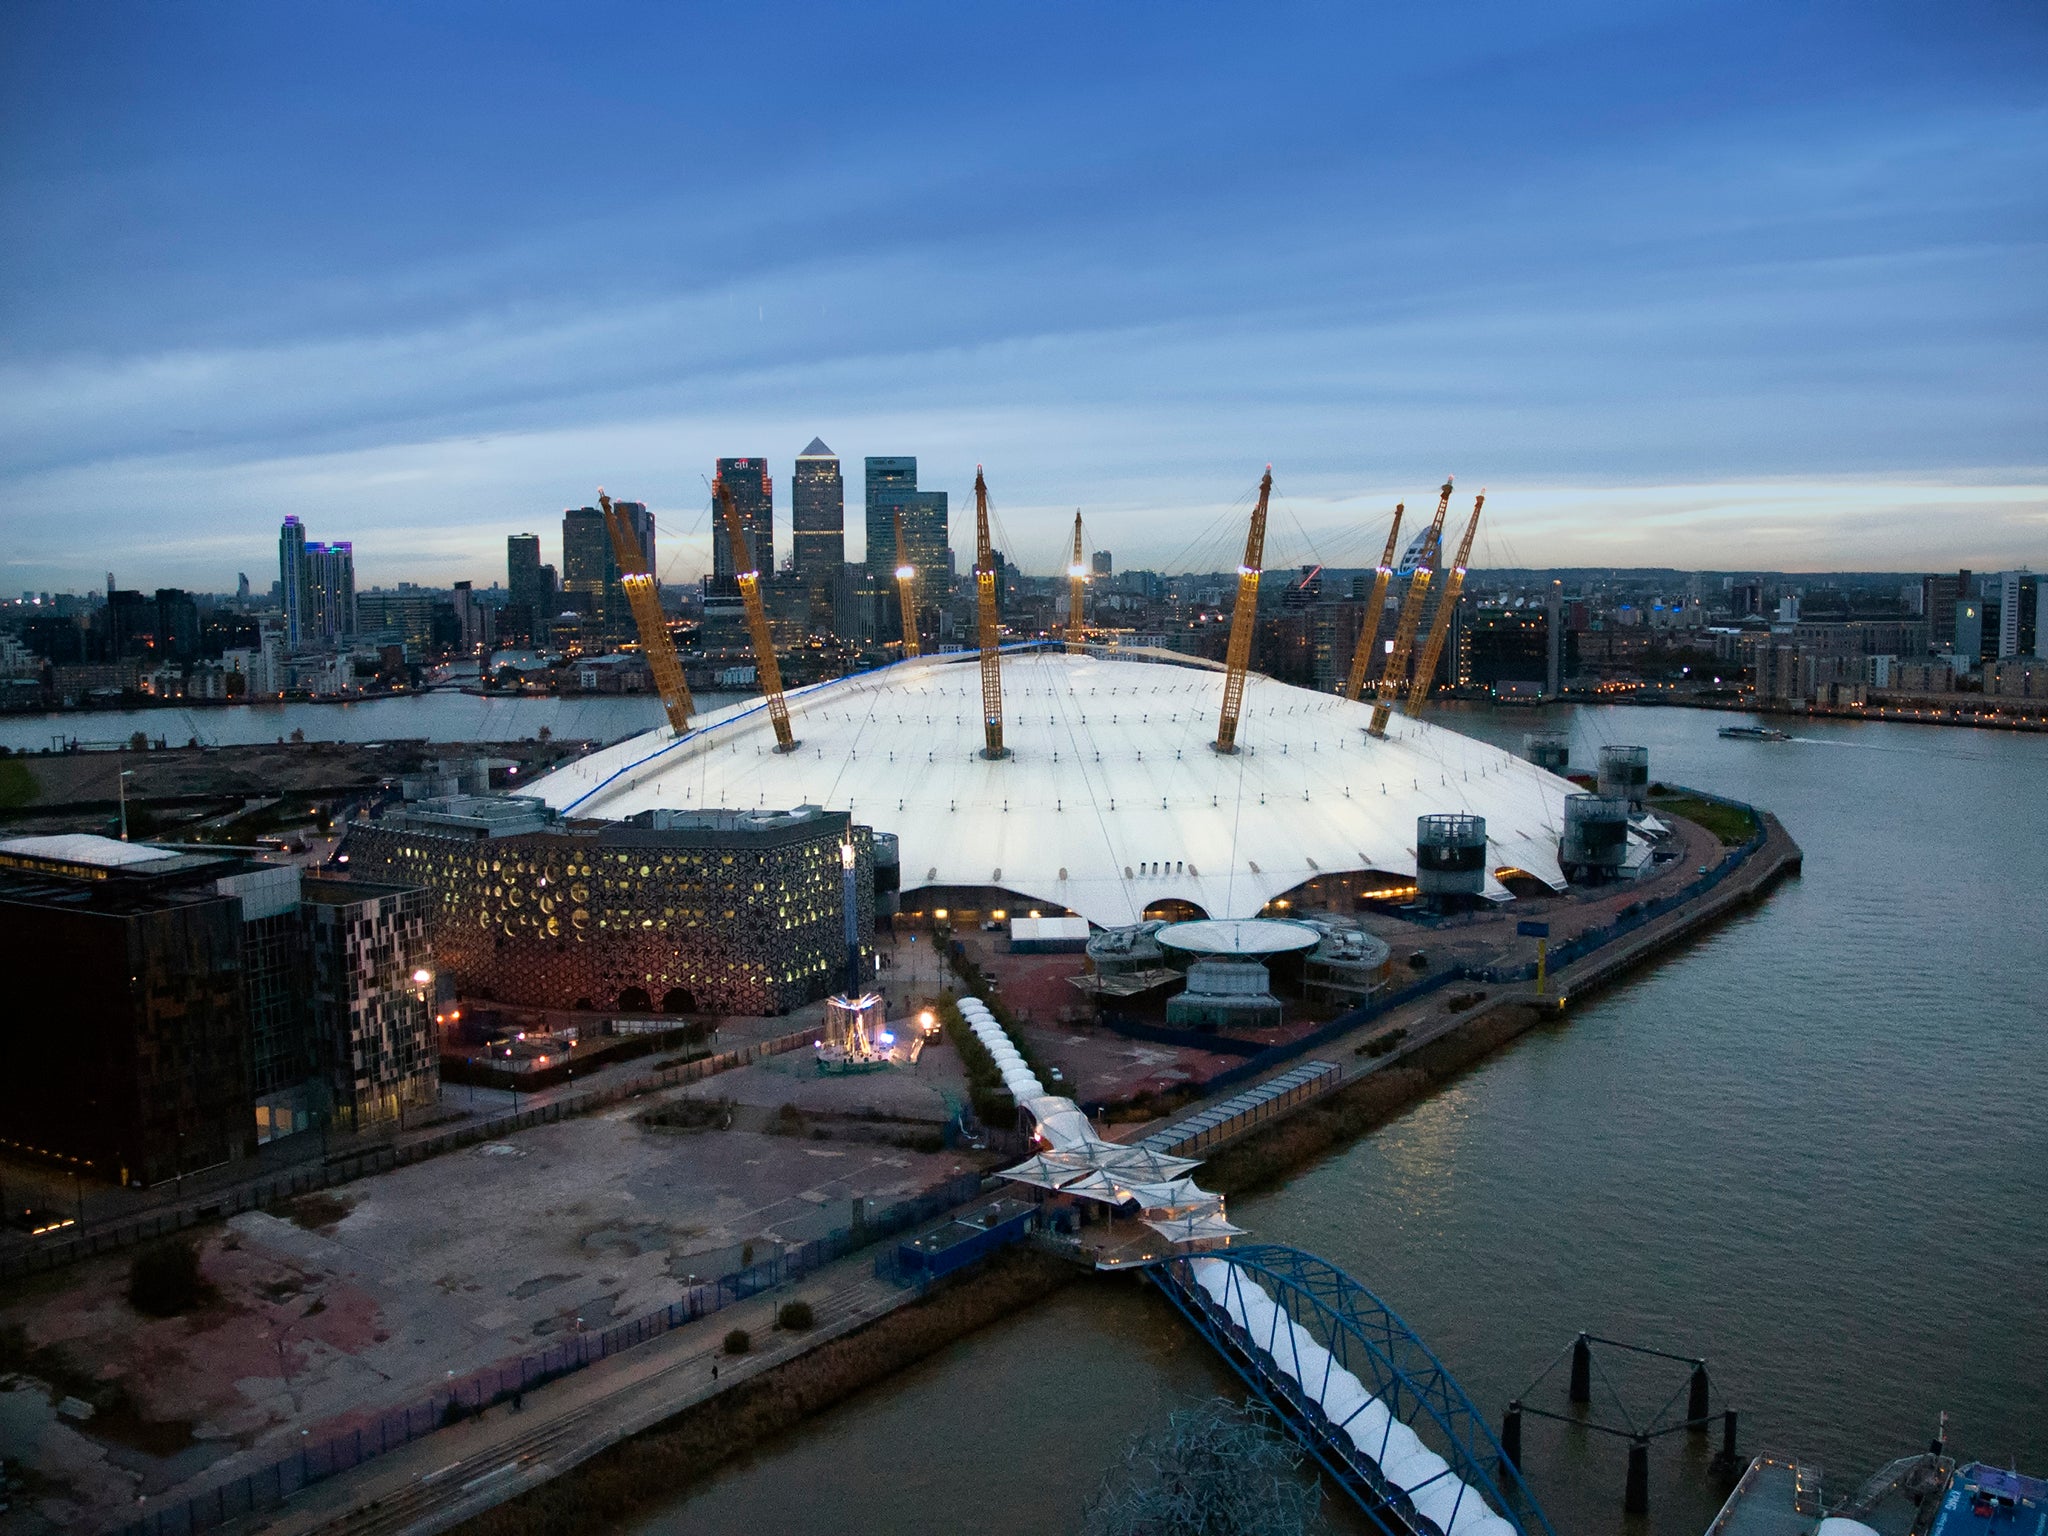 Start at North Greenwich Pier, home to the O2 arena